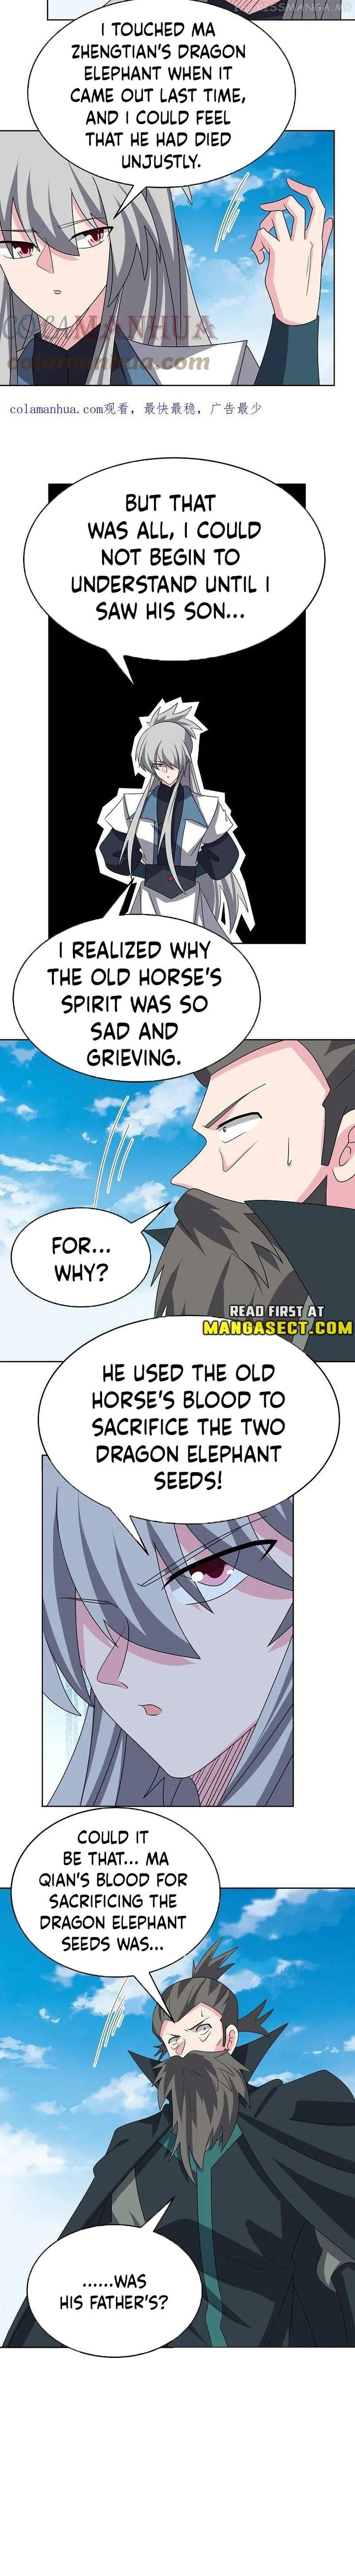 Above All Gods Chapter 455e Page 4